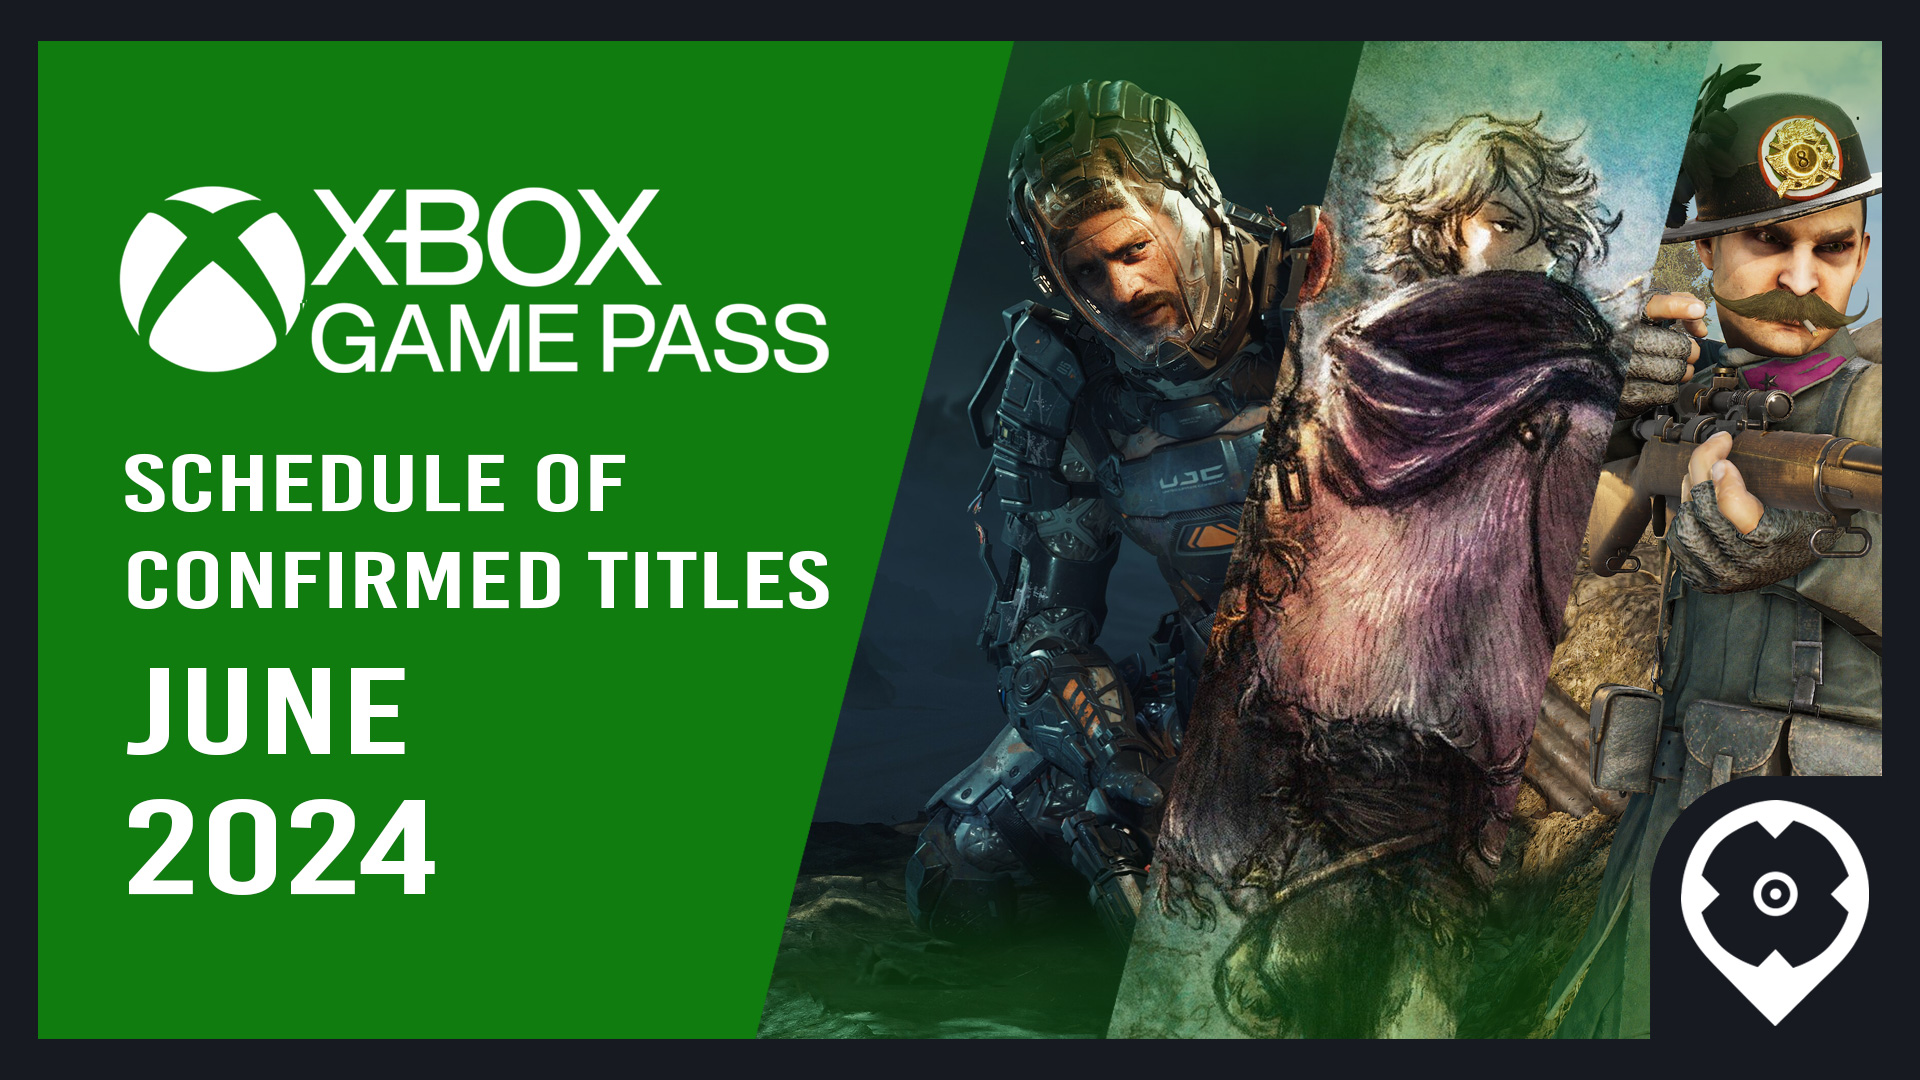 Xbox Game Pass June 2024 Schedule of Confirmed Titles